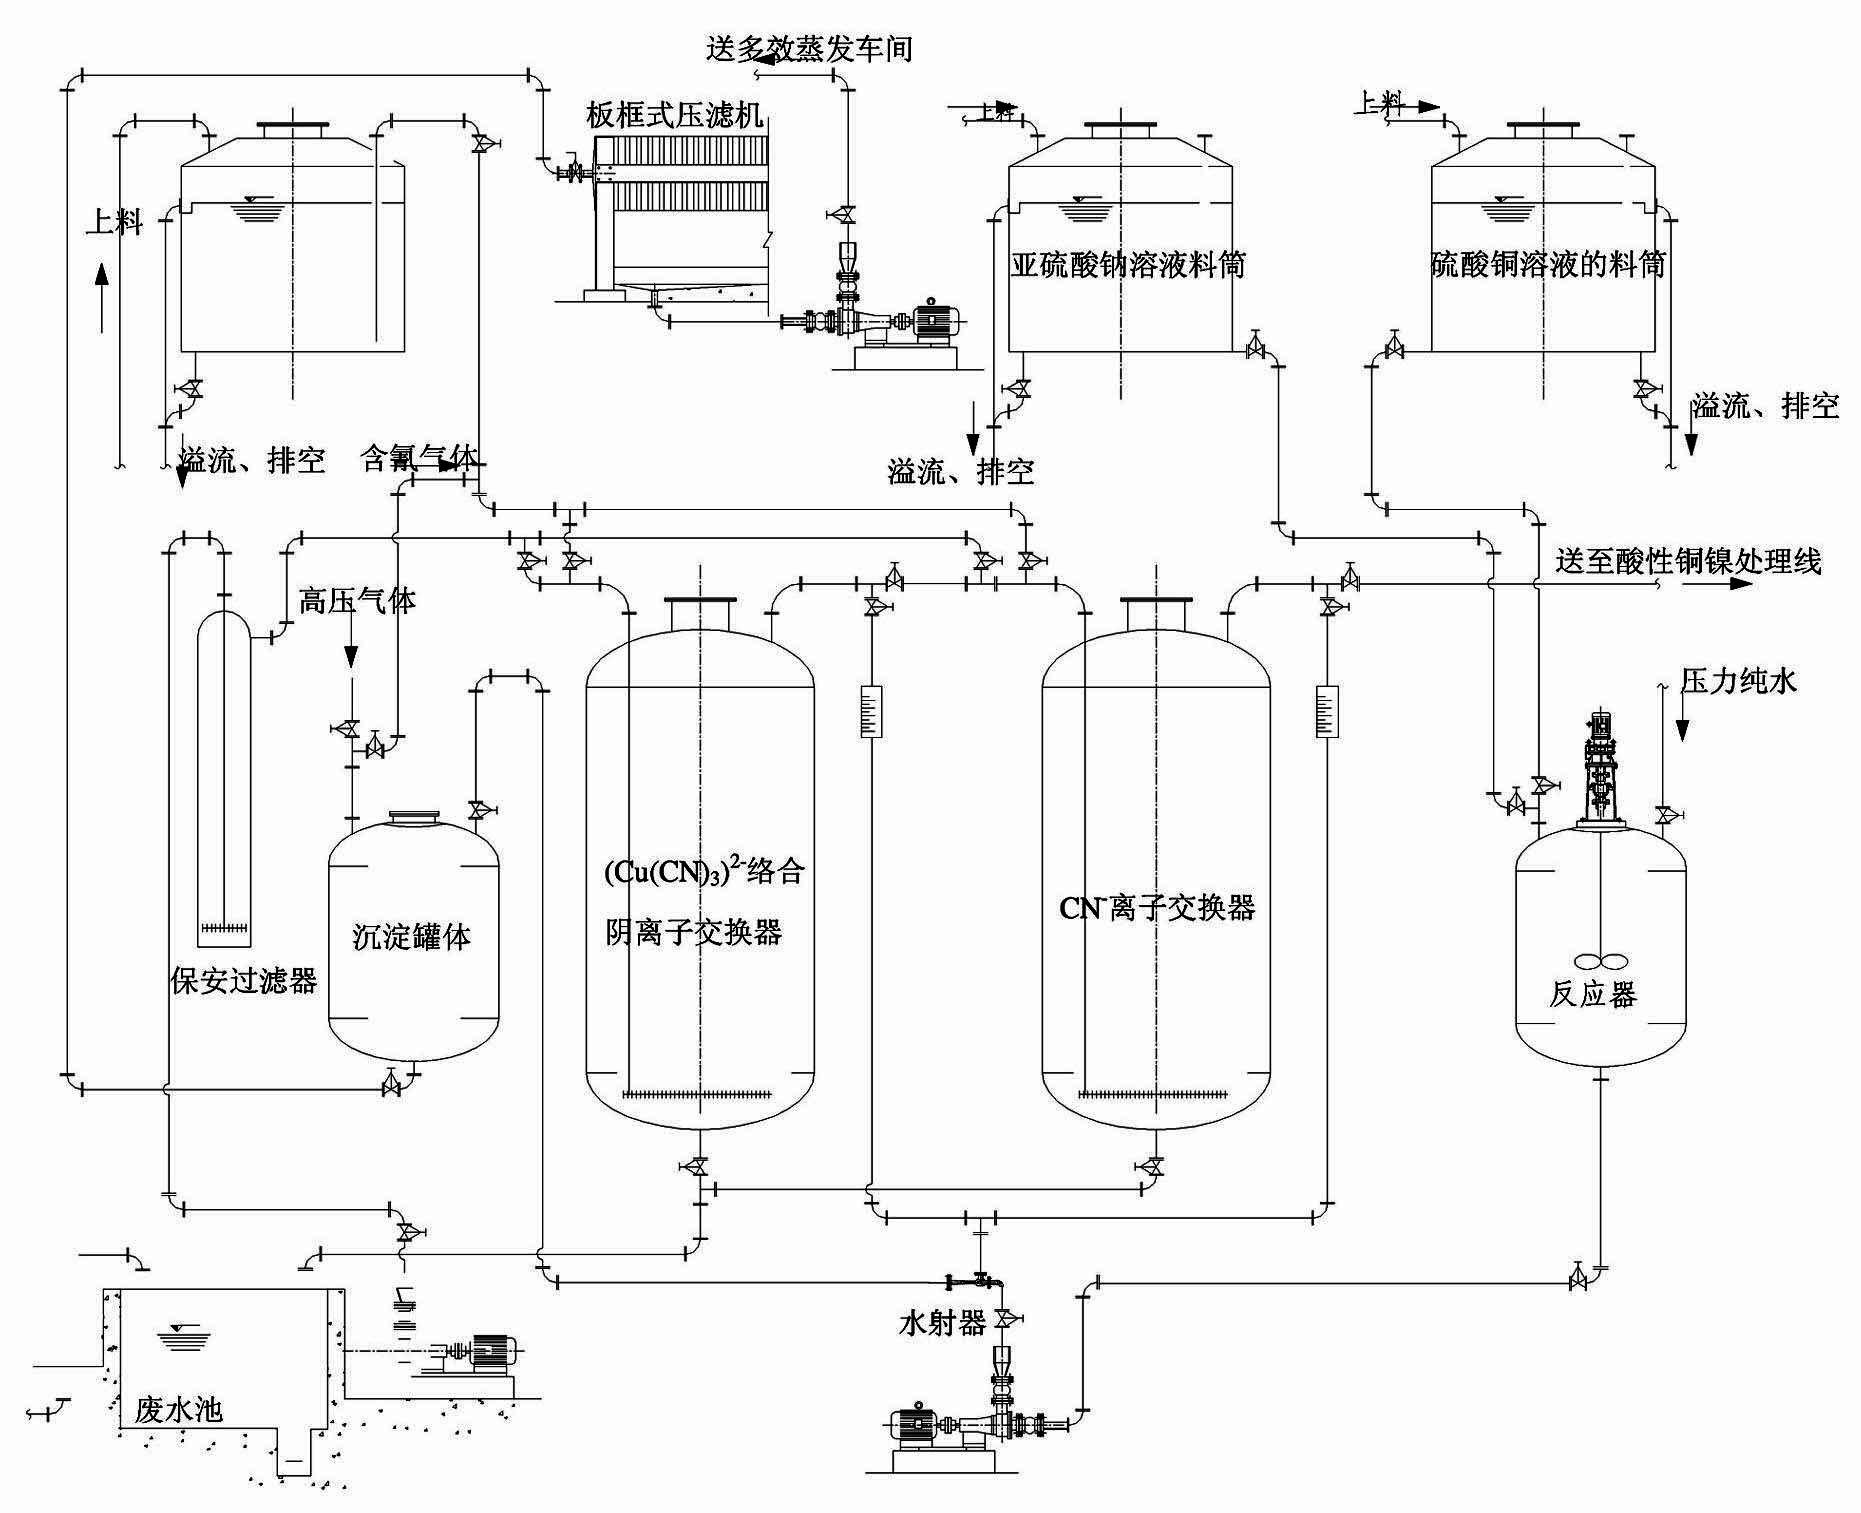 Process and equipment for treating wastewater containing cyanide ions